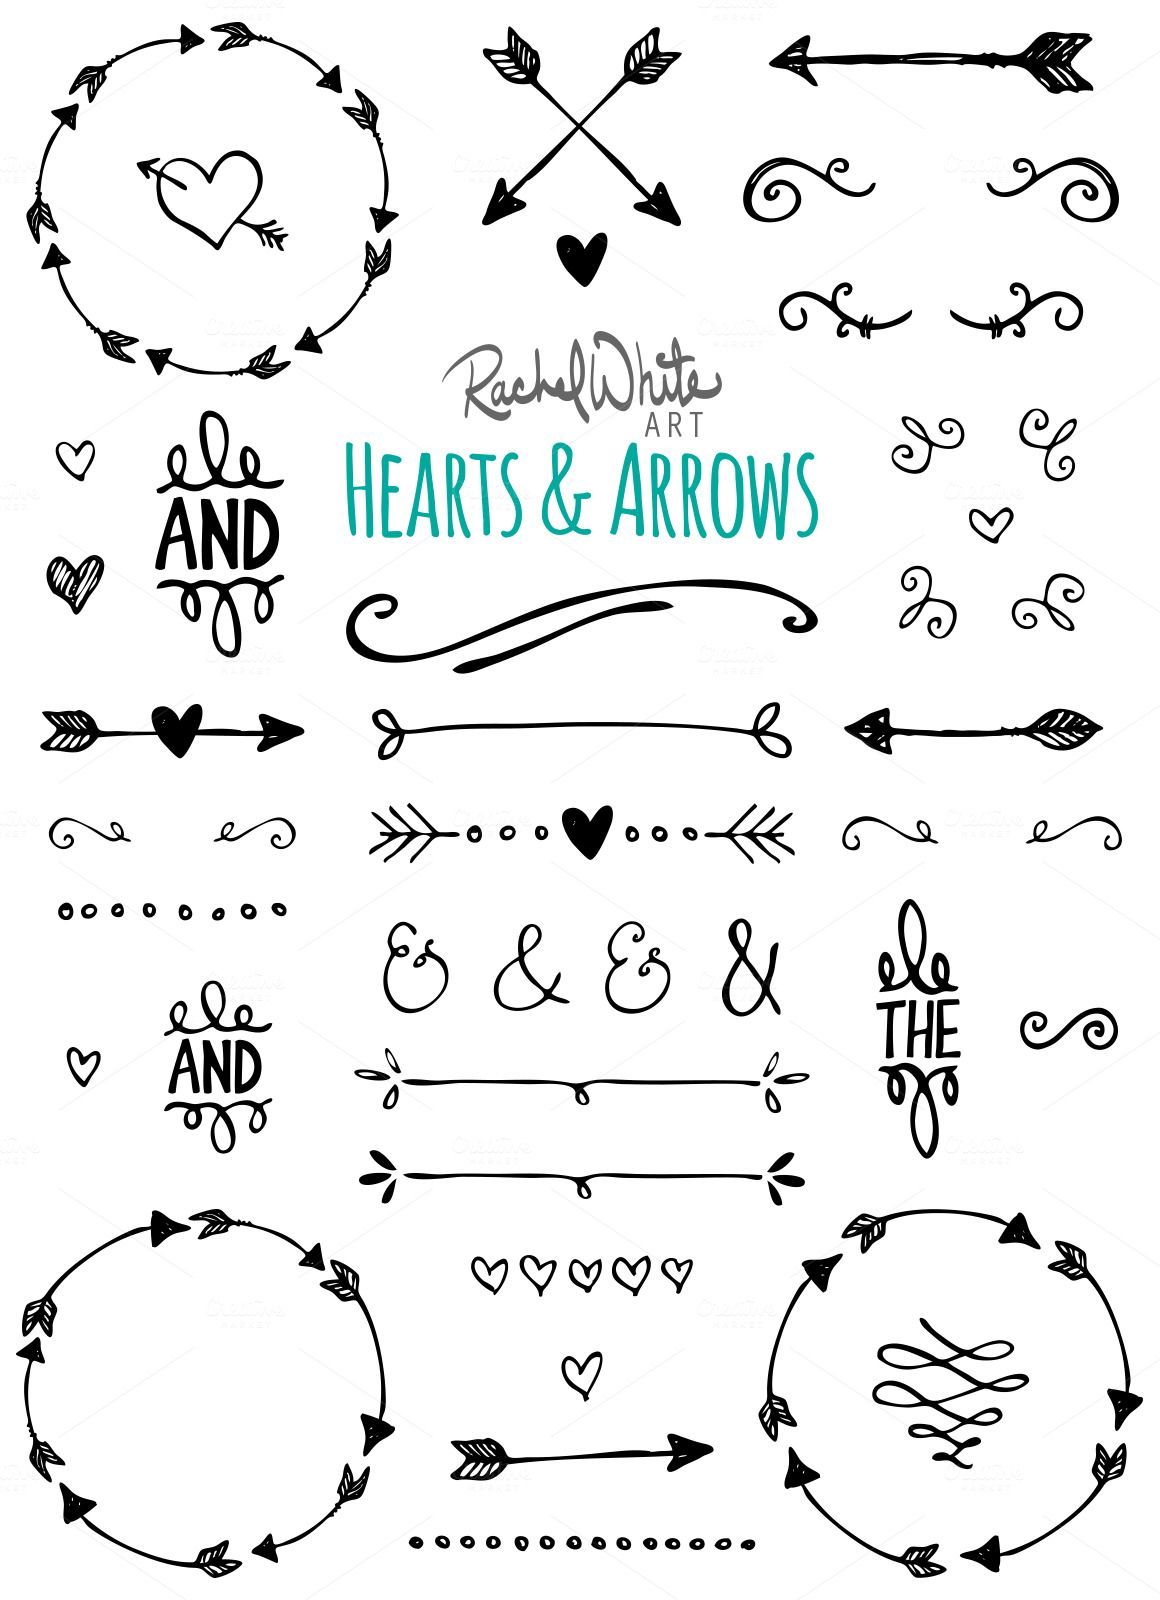 Hearts & Arrows – Vector & PNG Illustrations by Rachel White Art on Etsy